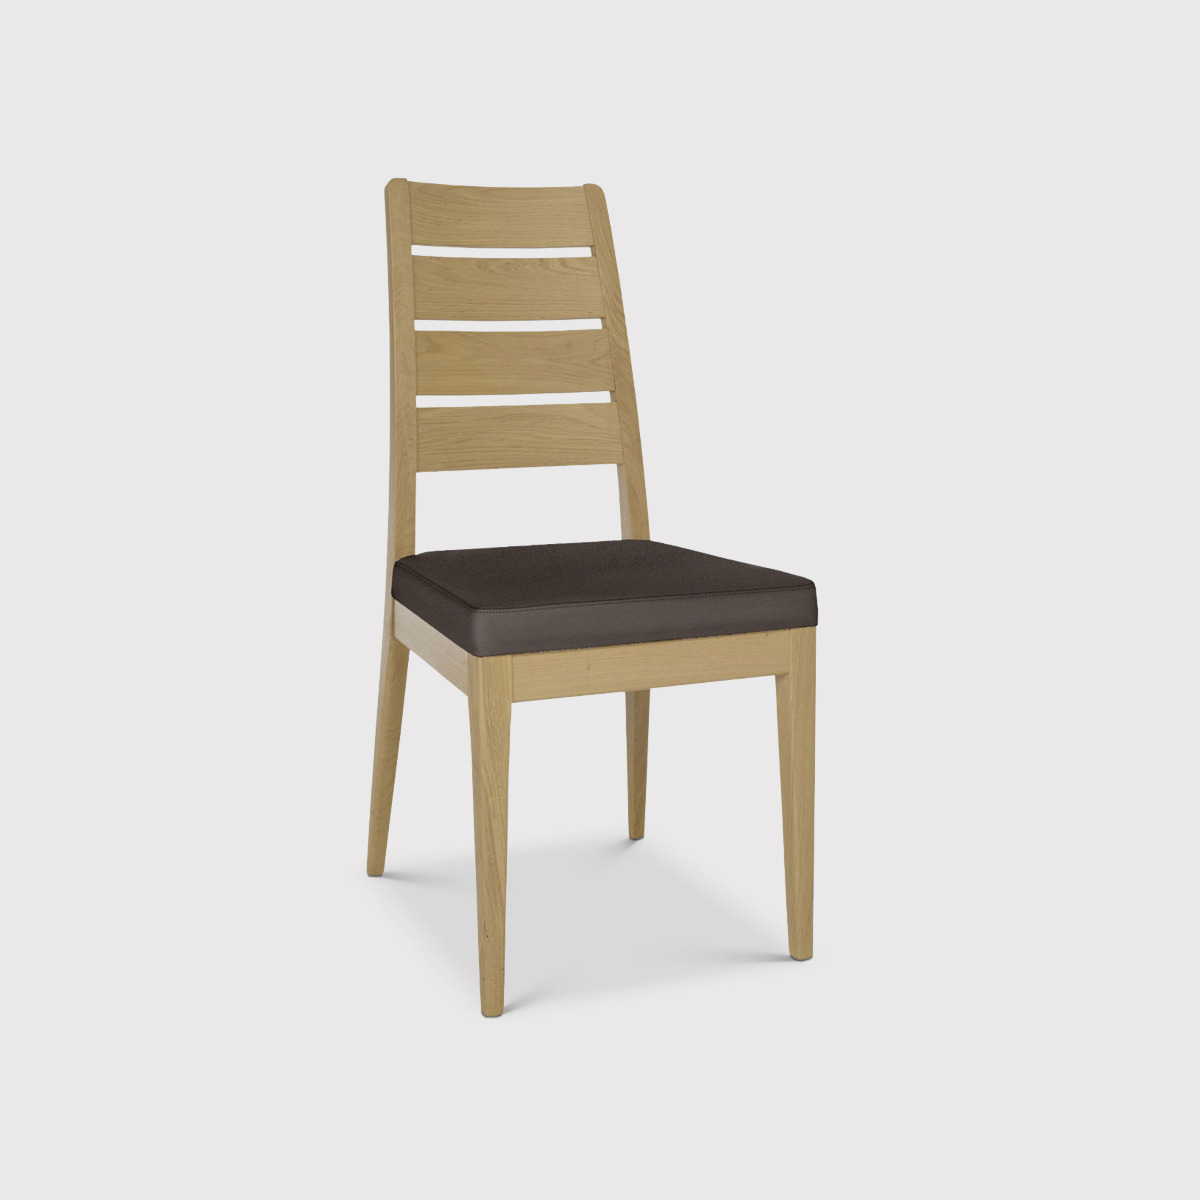 Ercol Romana Dining Chair, Brown - Barker & Stonehouse - image 1